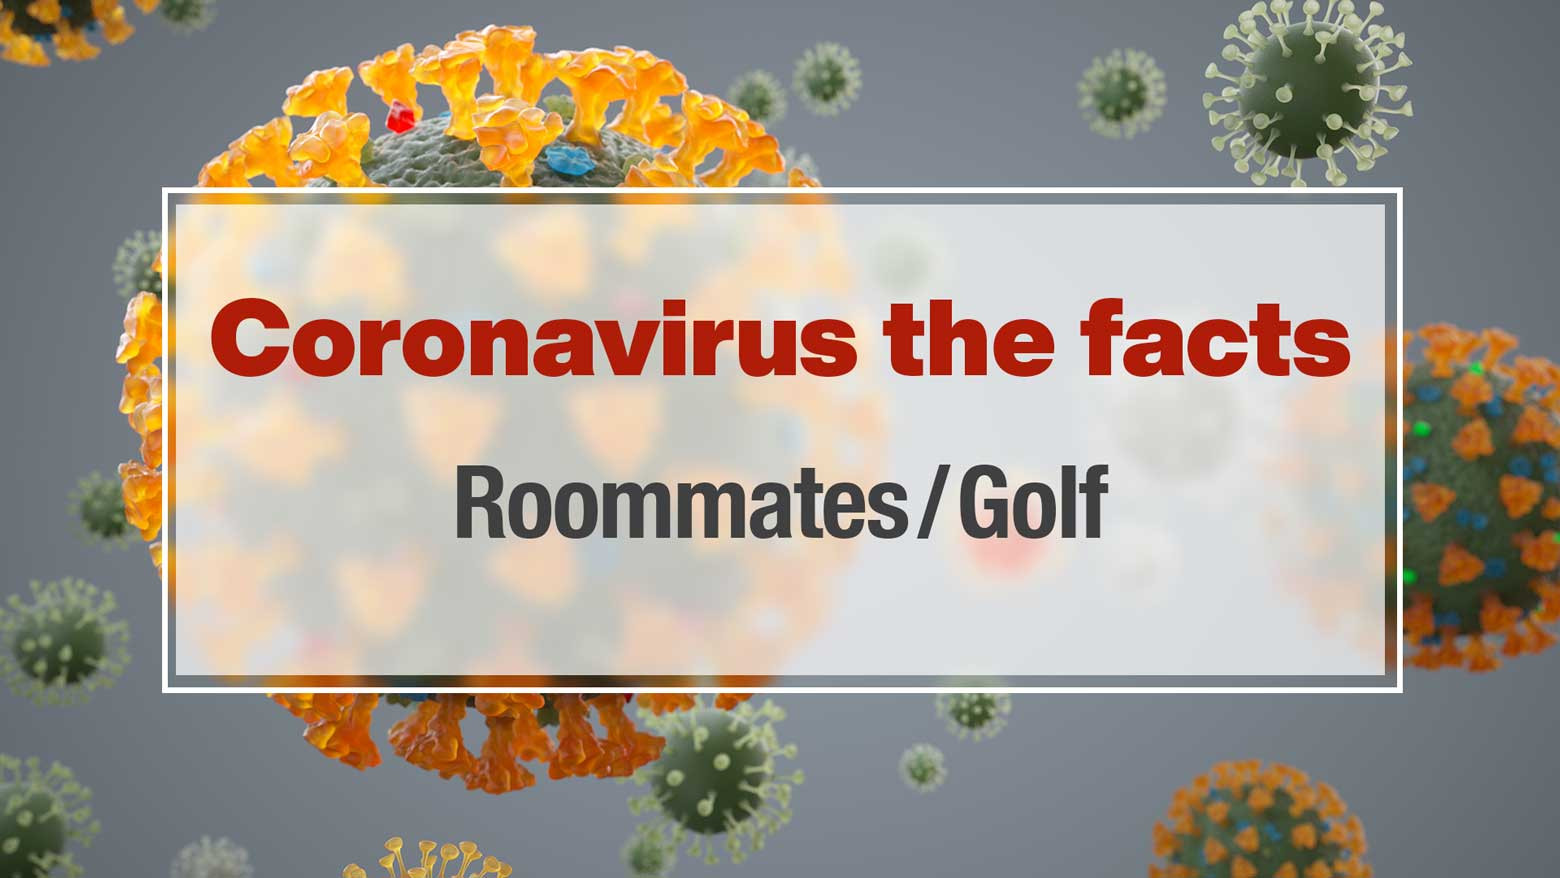 What should I do if my roommate is infected?
Is it safe to return to the golf course?